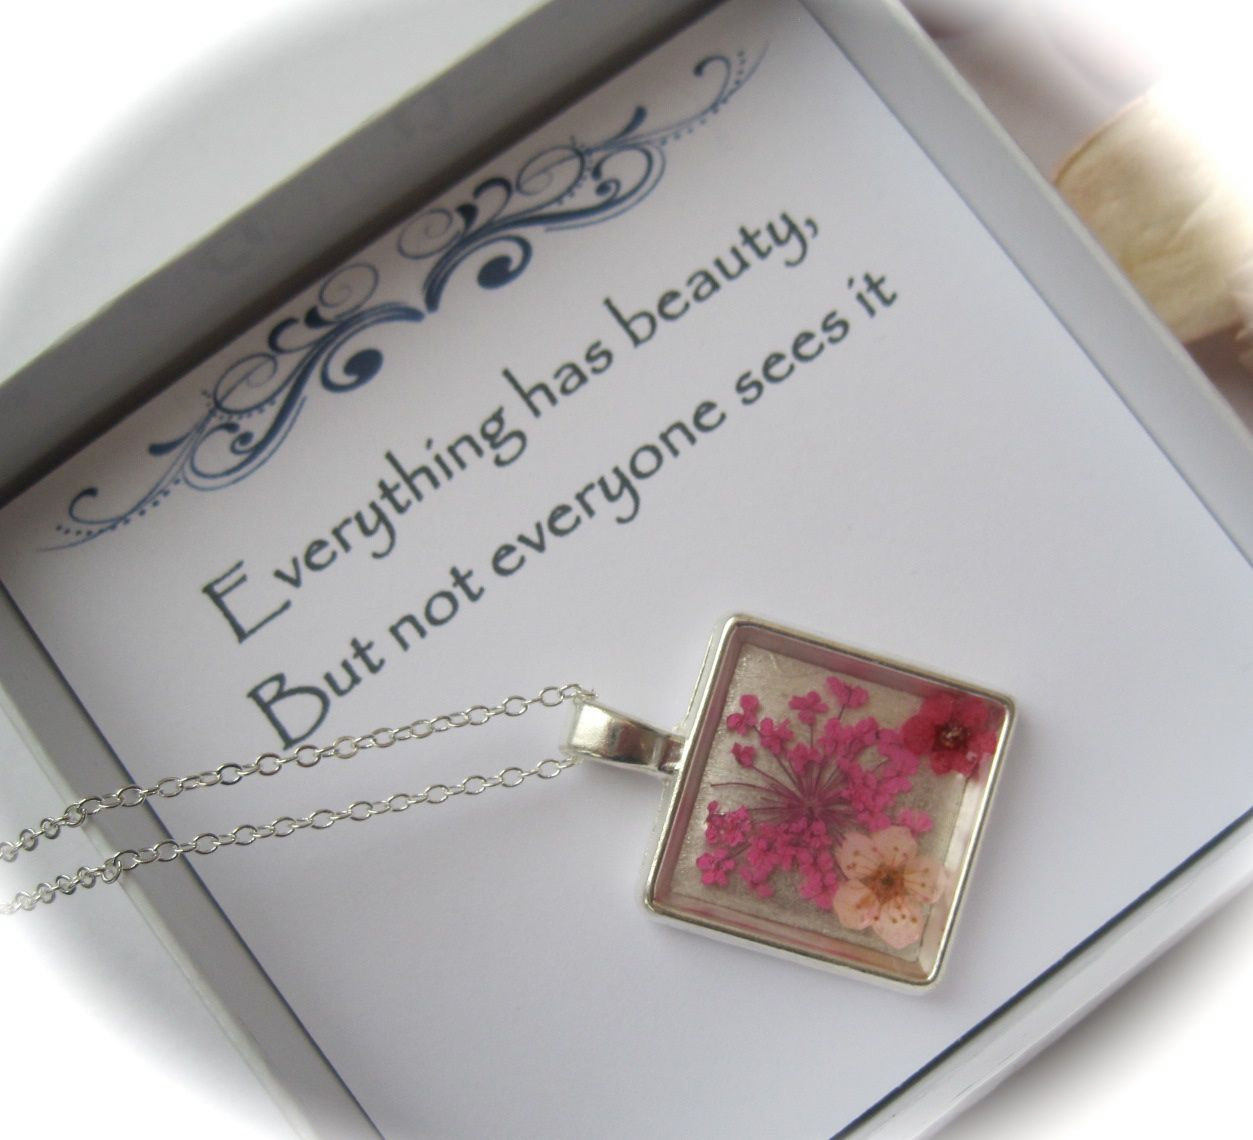 Memories Of Flowers - A Bright Pink And White Dried Flower Memory Necklace With A Beautiful Message